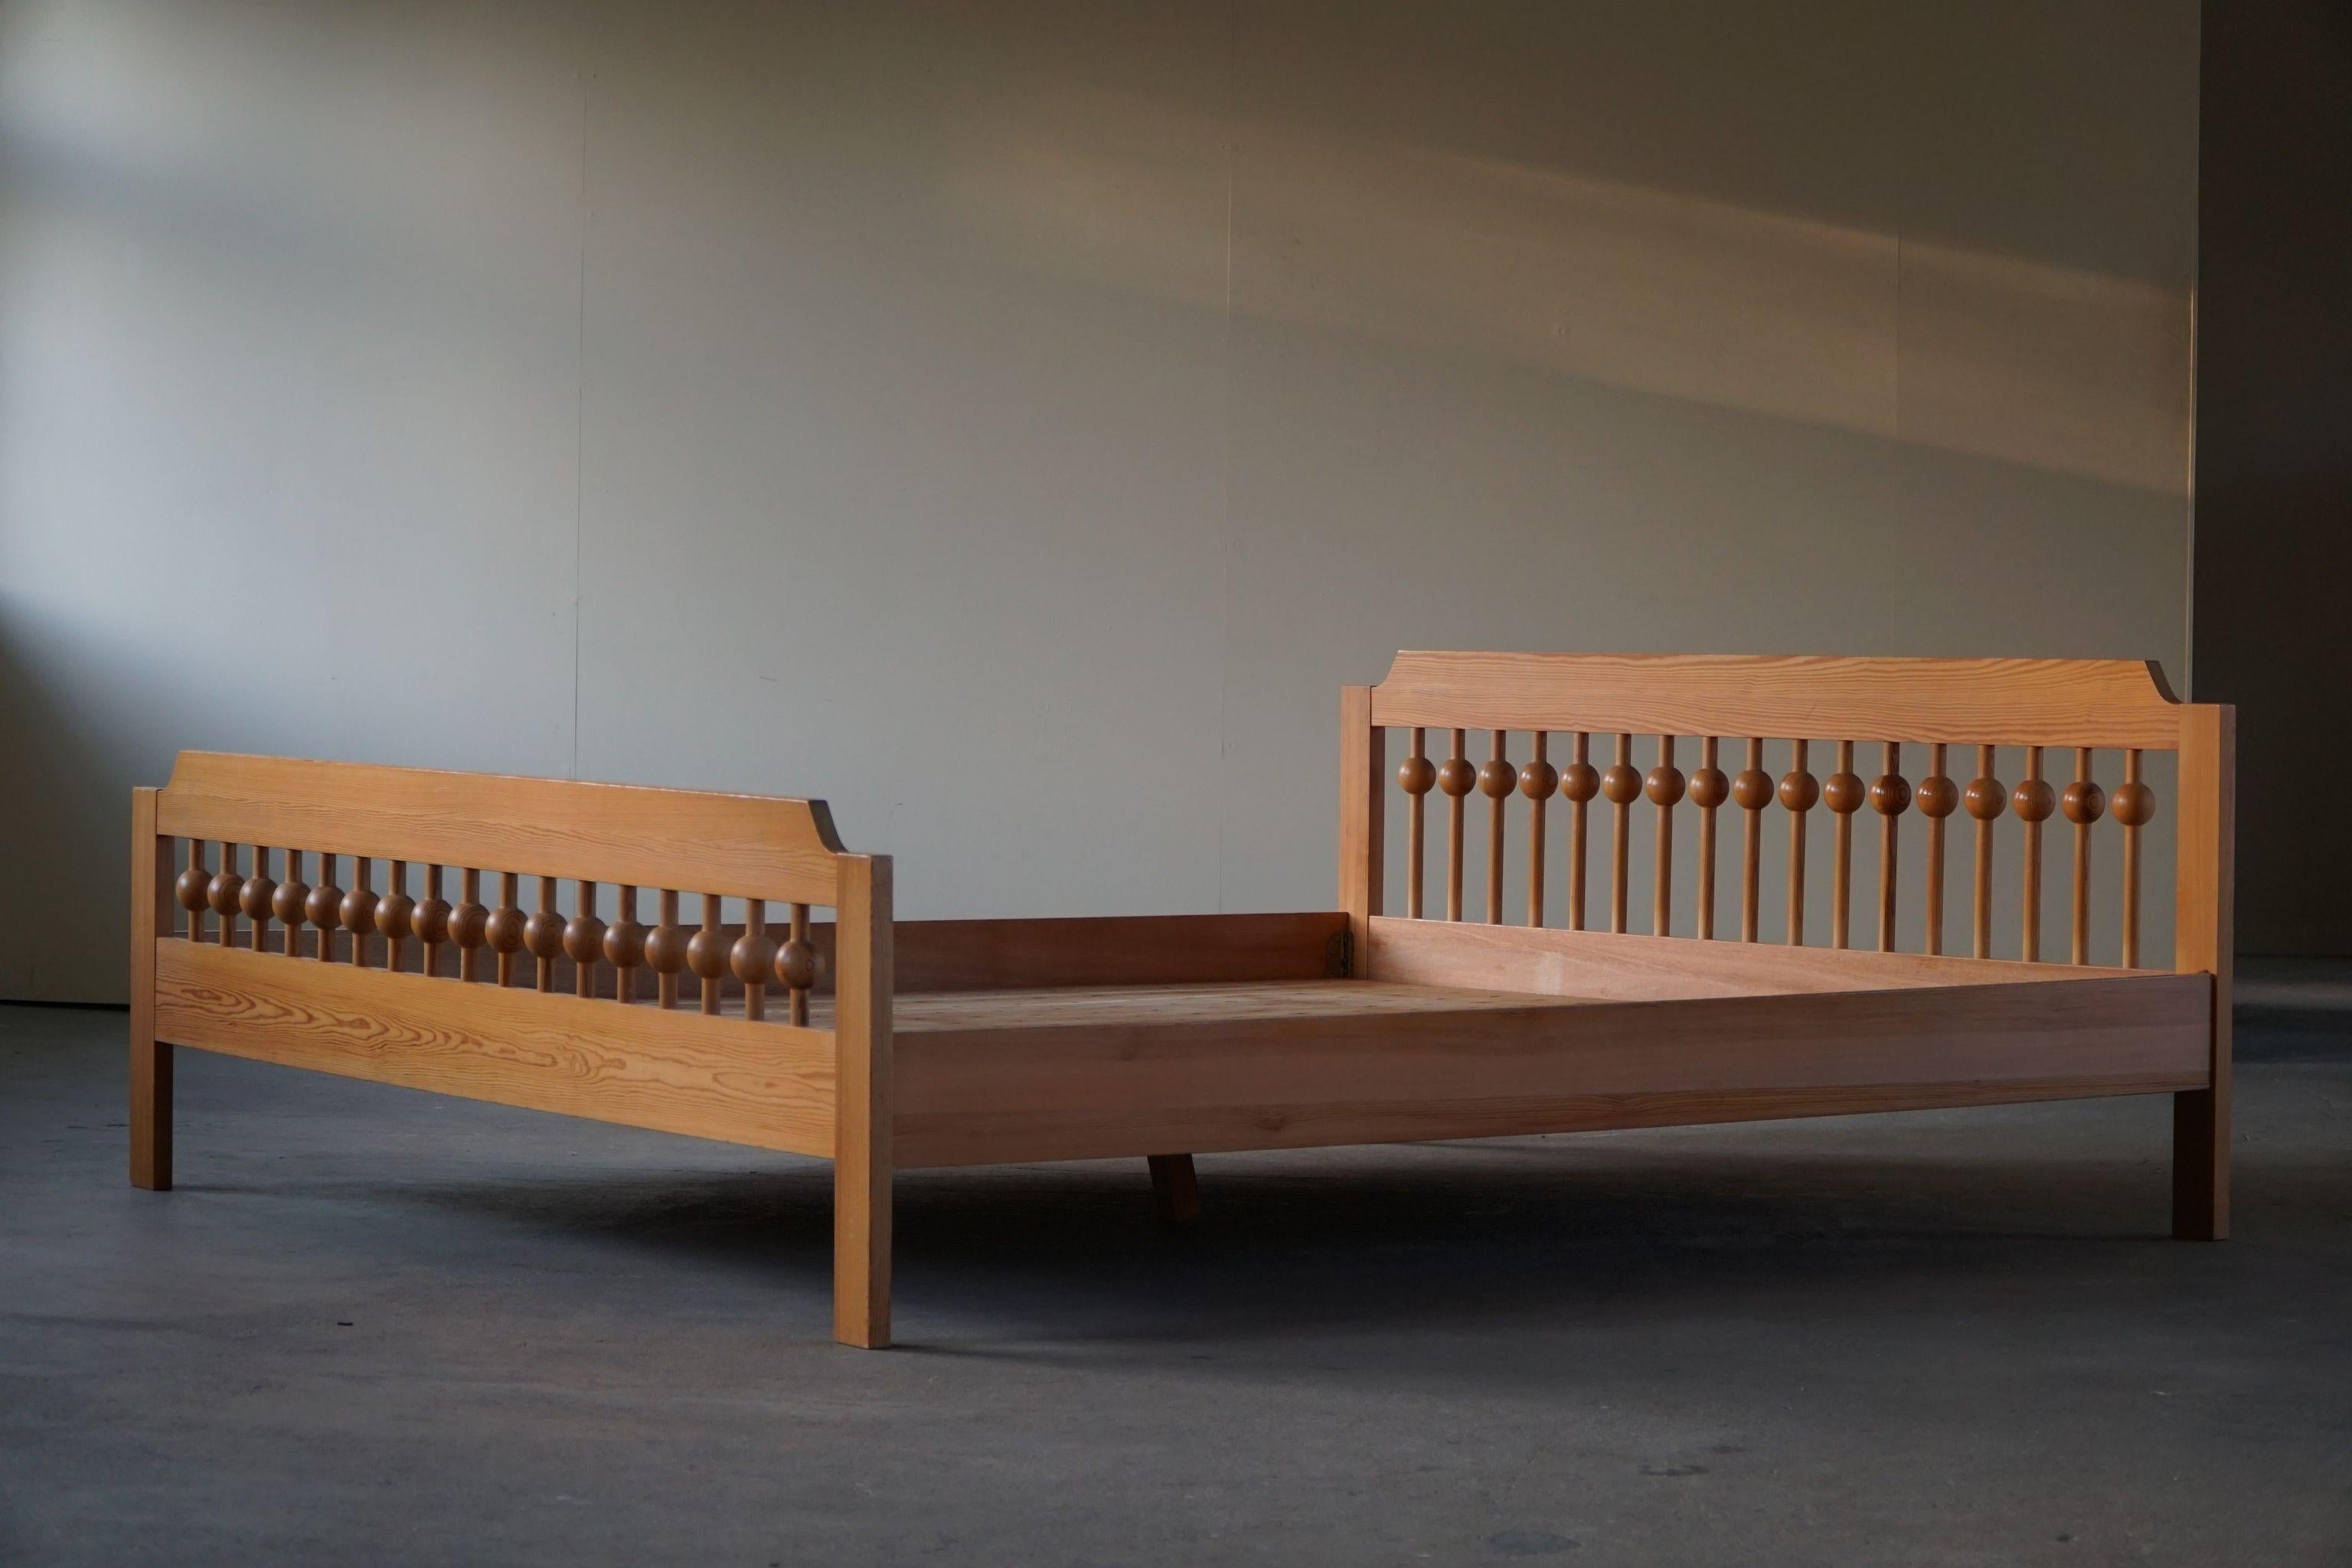 Large freestanding bed in solid pine, crafted by Swedish designer Sven Larsson in 1960s. Such a sculptural figure for the modern interior with plenty of details.

Height is measured from the top of the back rail. It measures 36 cm to the top of